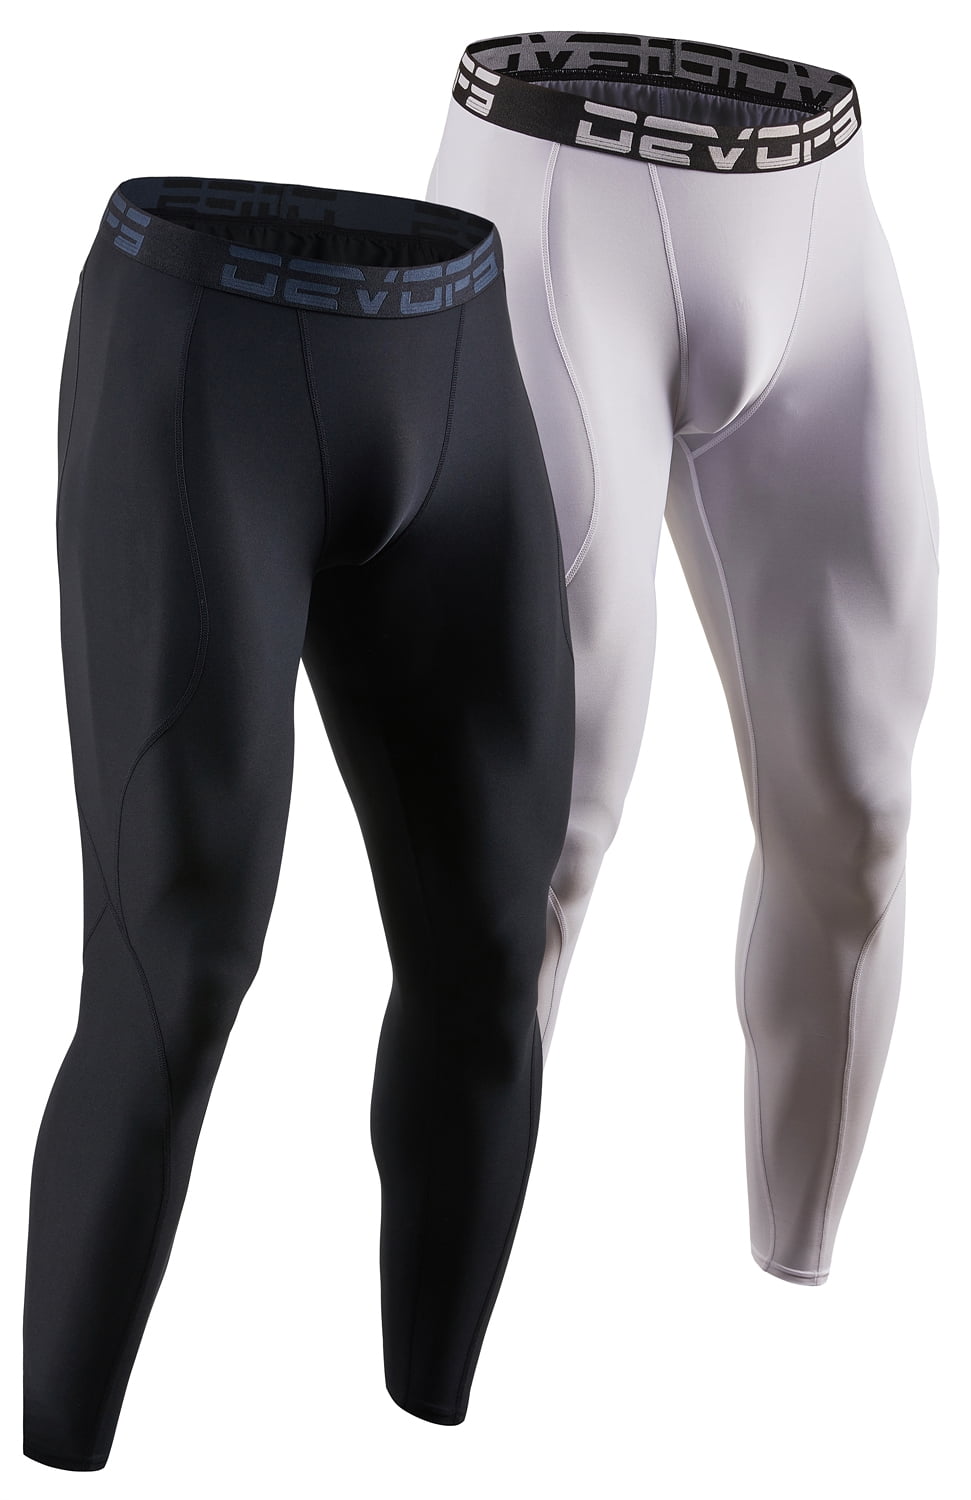 Physiclo Pro Resistance Men's Full-Length Compression Training